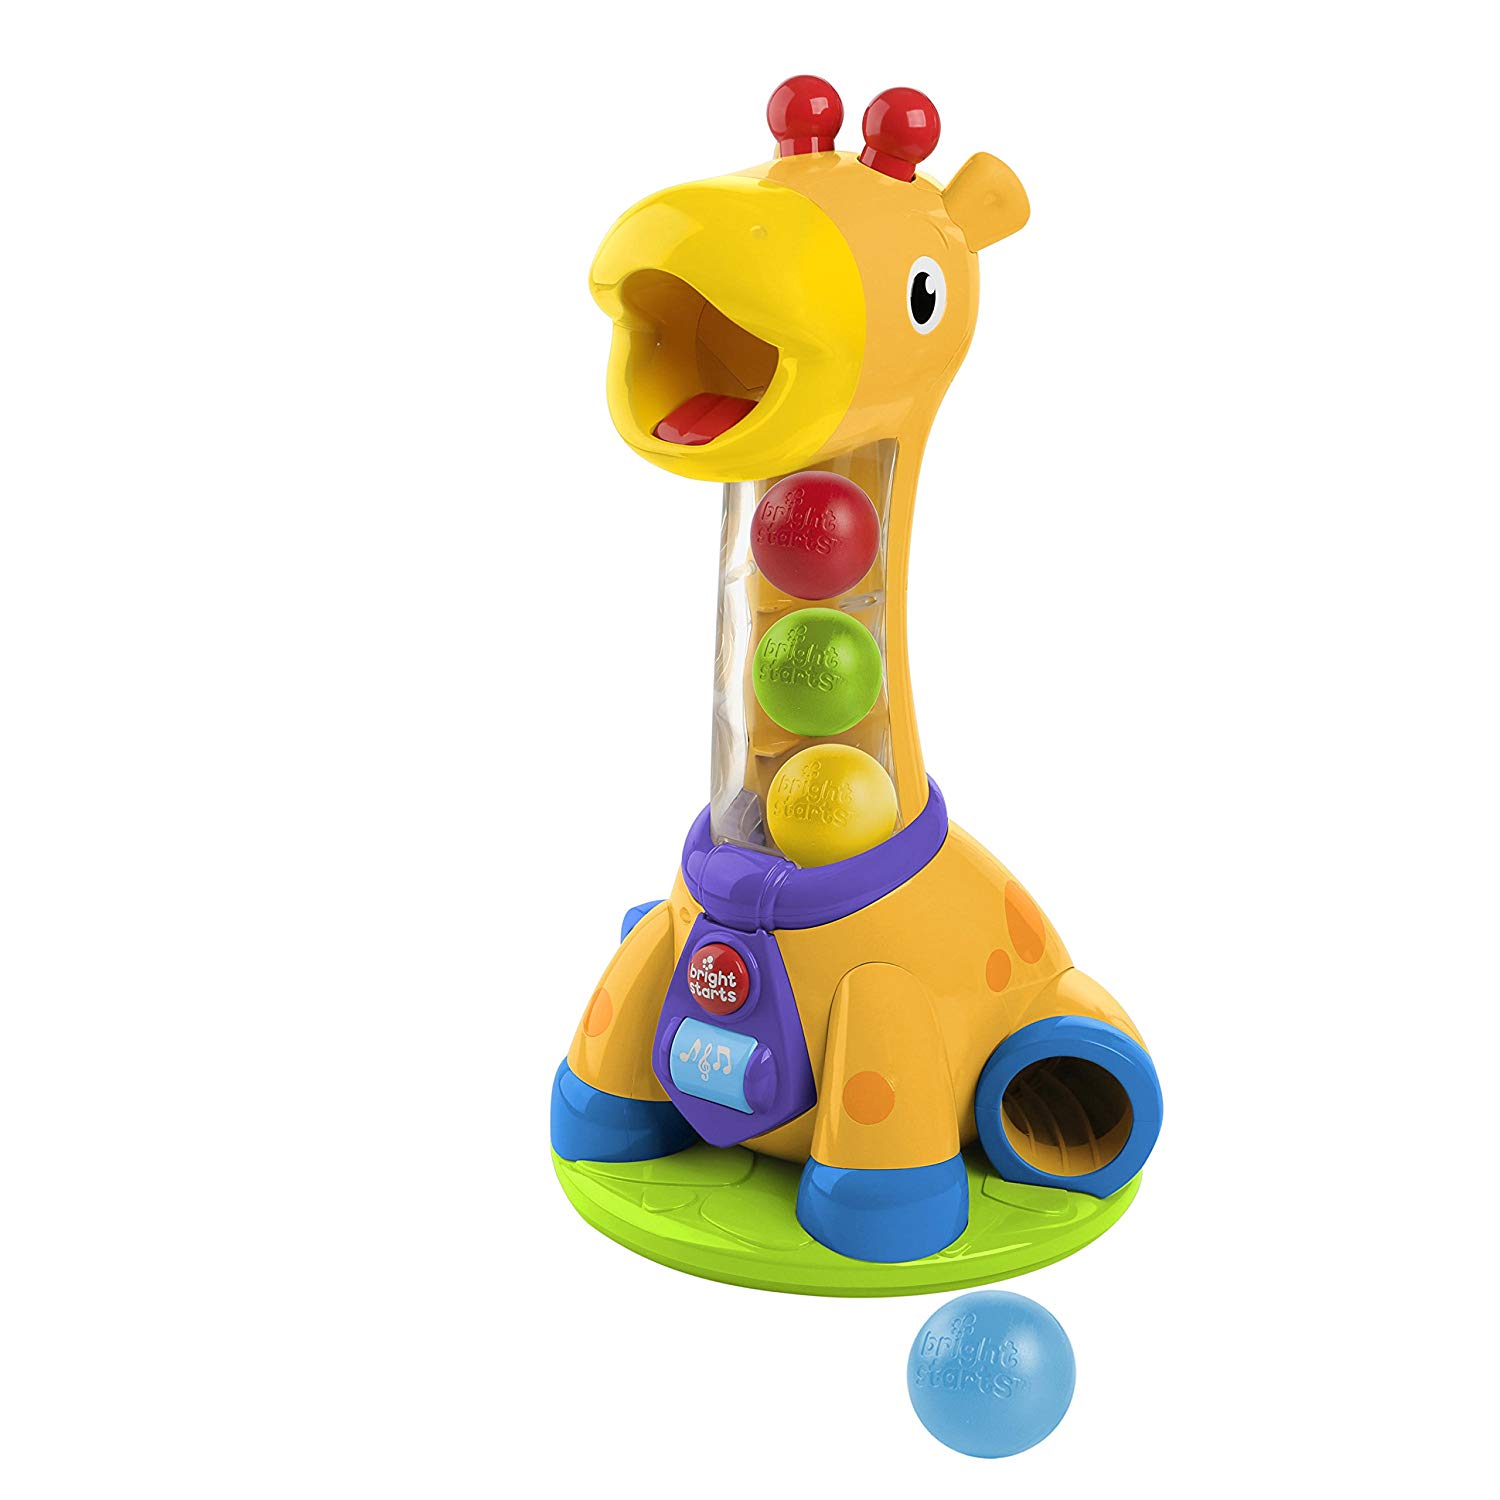 Bright Starts 10933 Spin And Giggle Giraffe Toy, Yellow